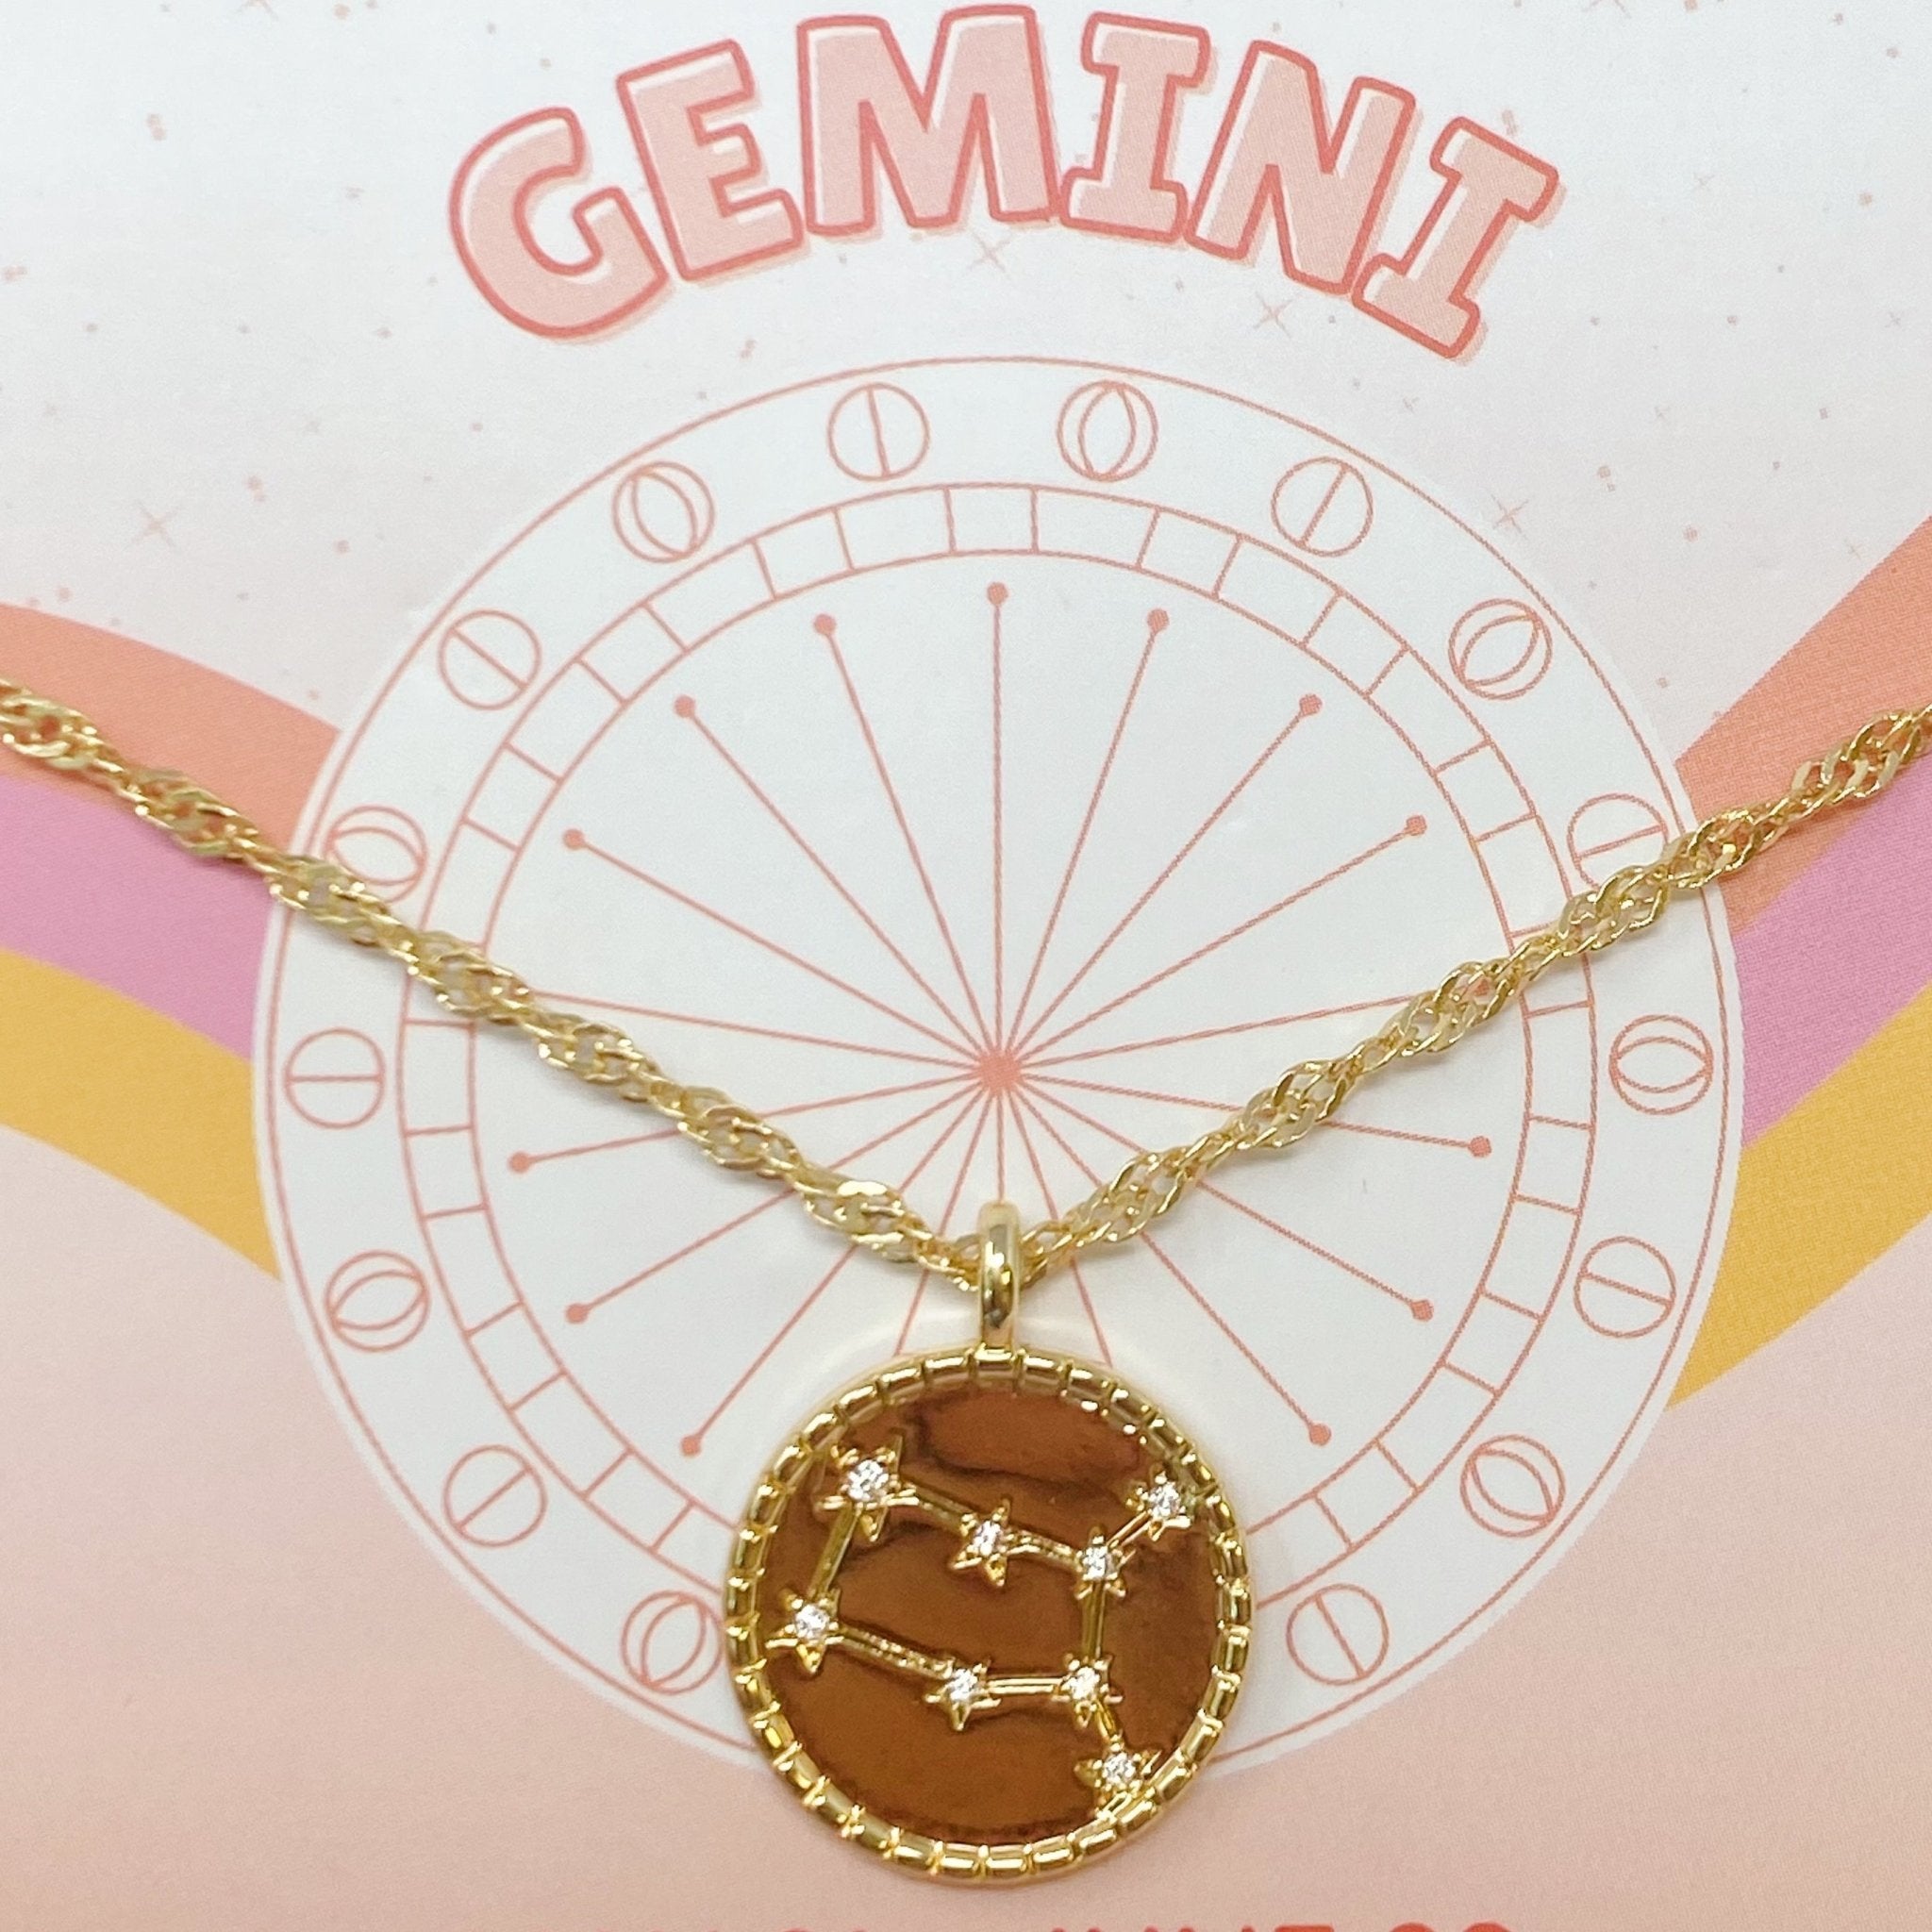 Astrological Glam Necklace - The Kindness Cause